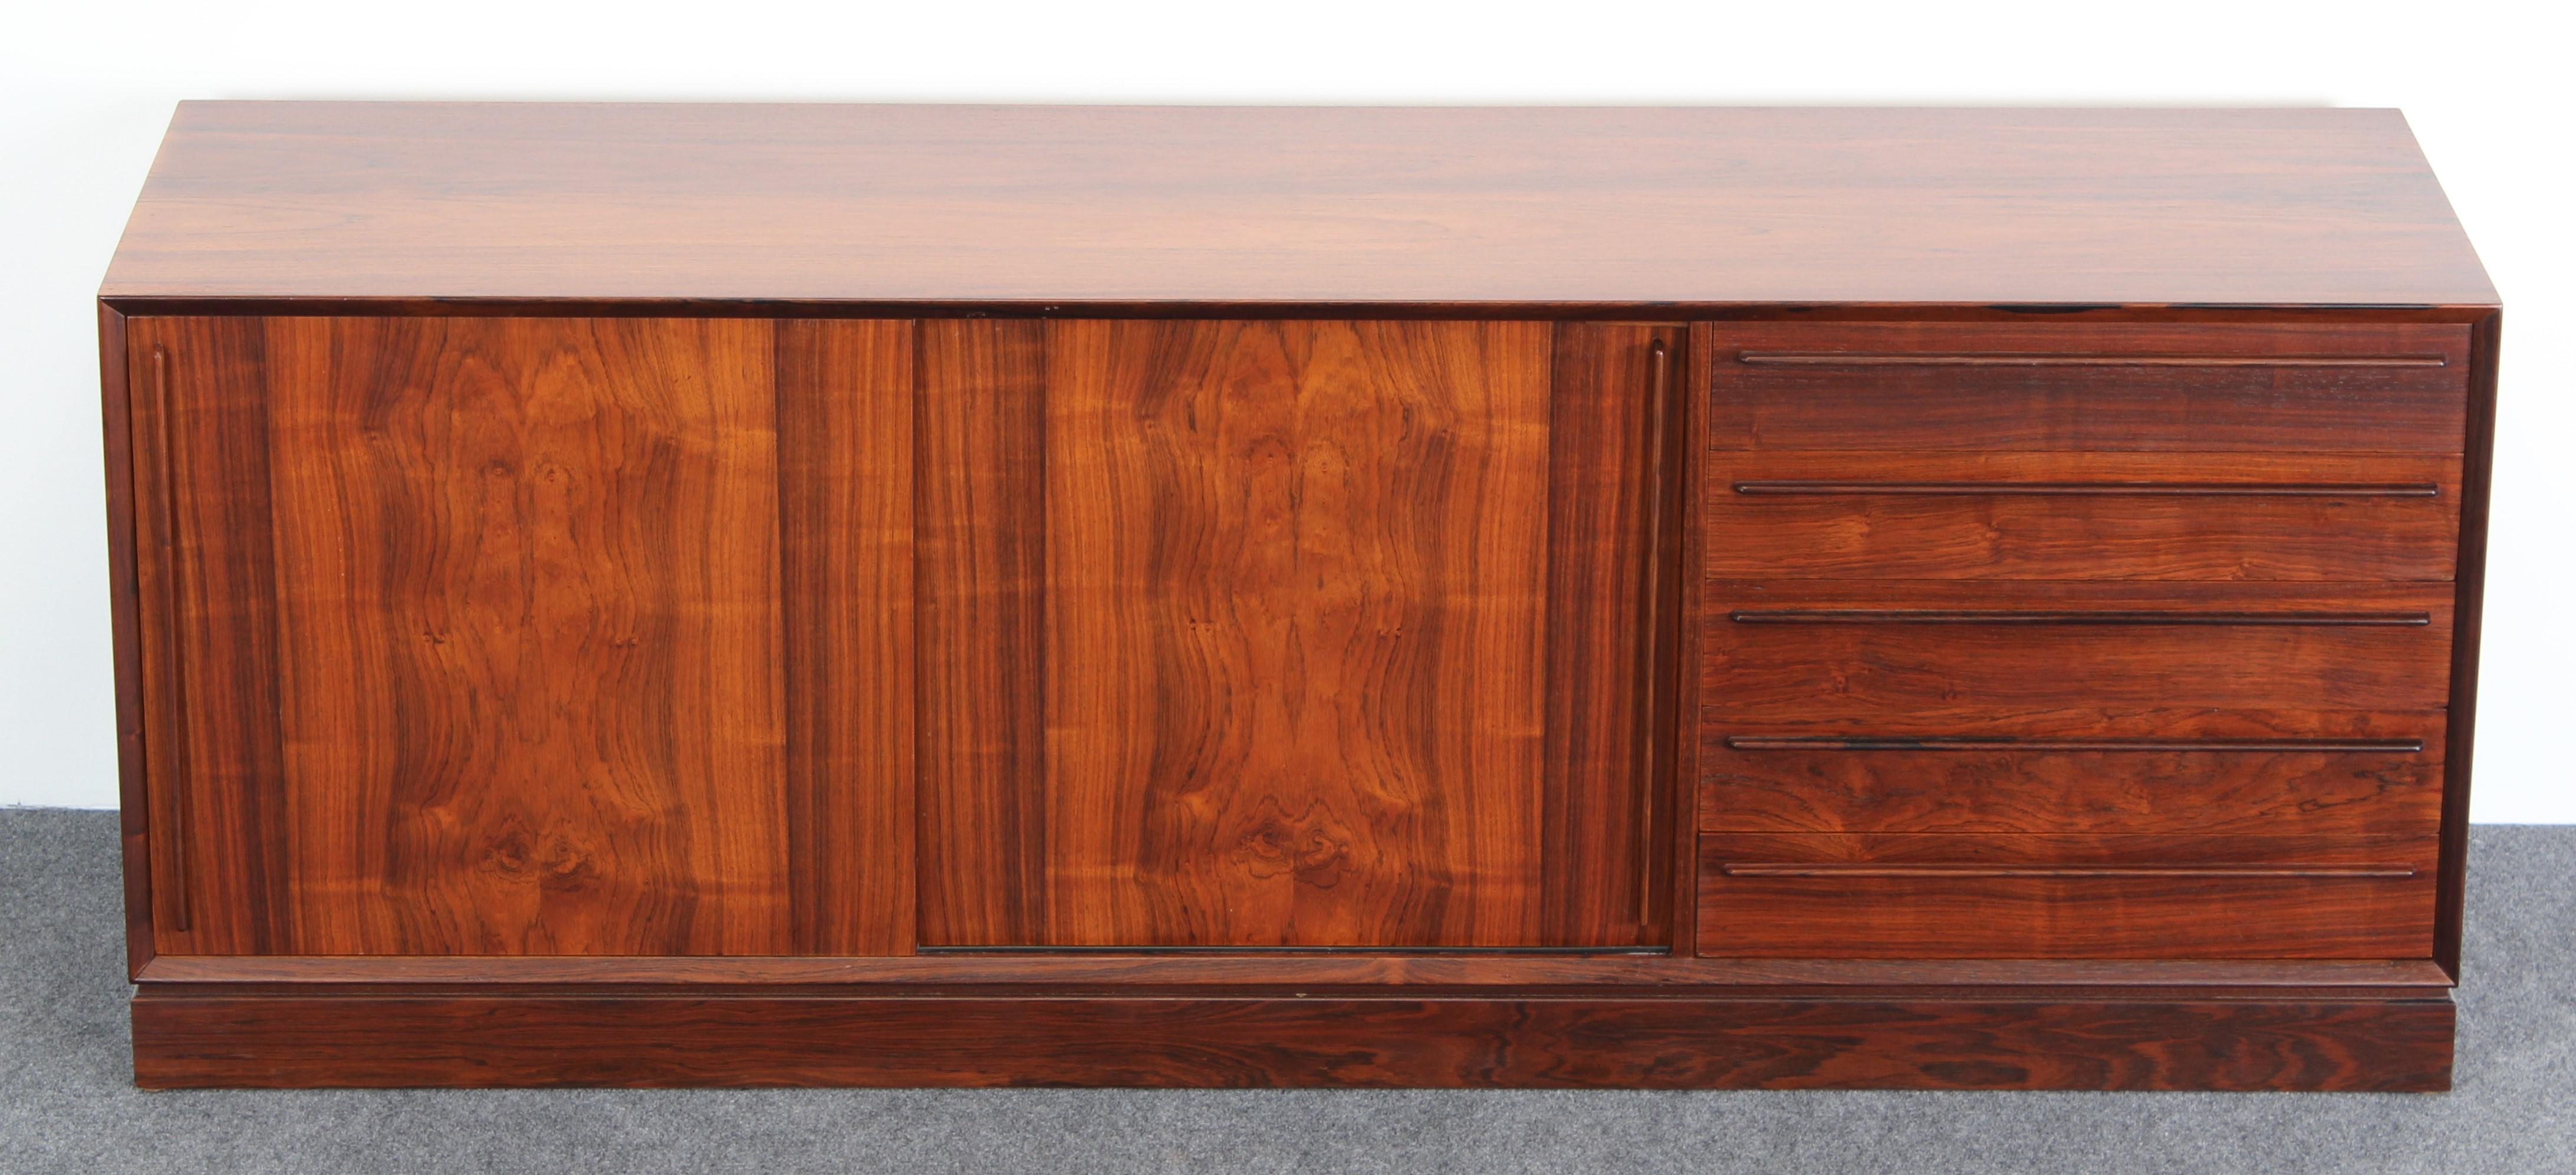 A beautiful H.P. Hansen rosewood credenza manufactured by Mobelindustri Randers in Denmark. Very versatile with five drawers and two sliding doors with two interior shelves. The sideboard is in very good condition with age appropriate